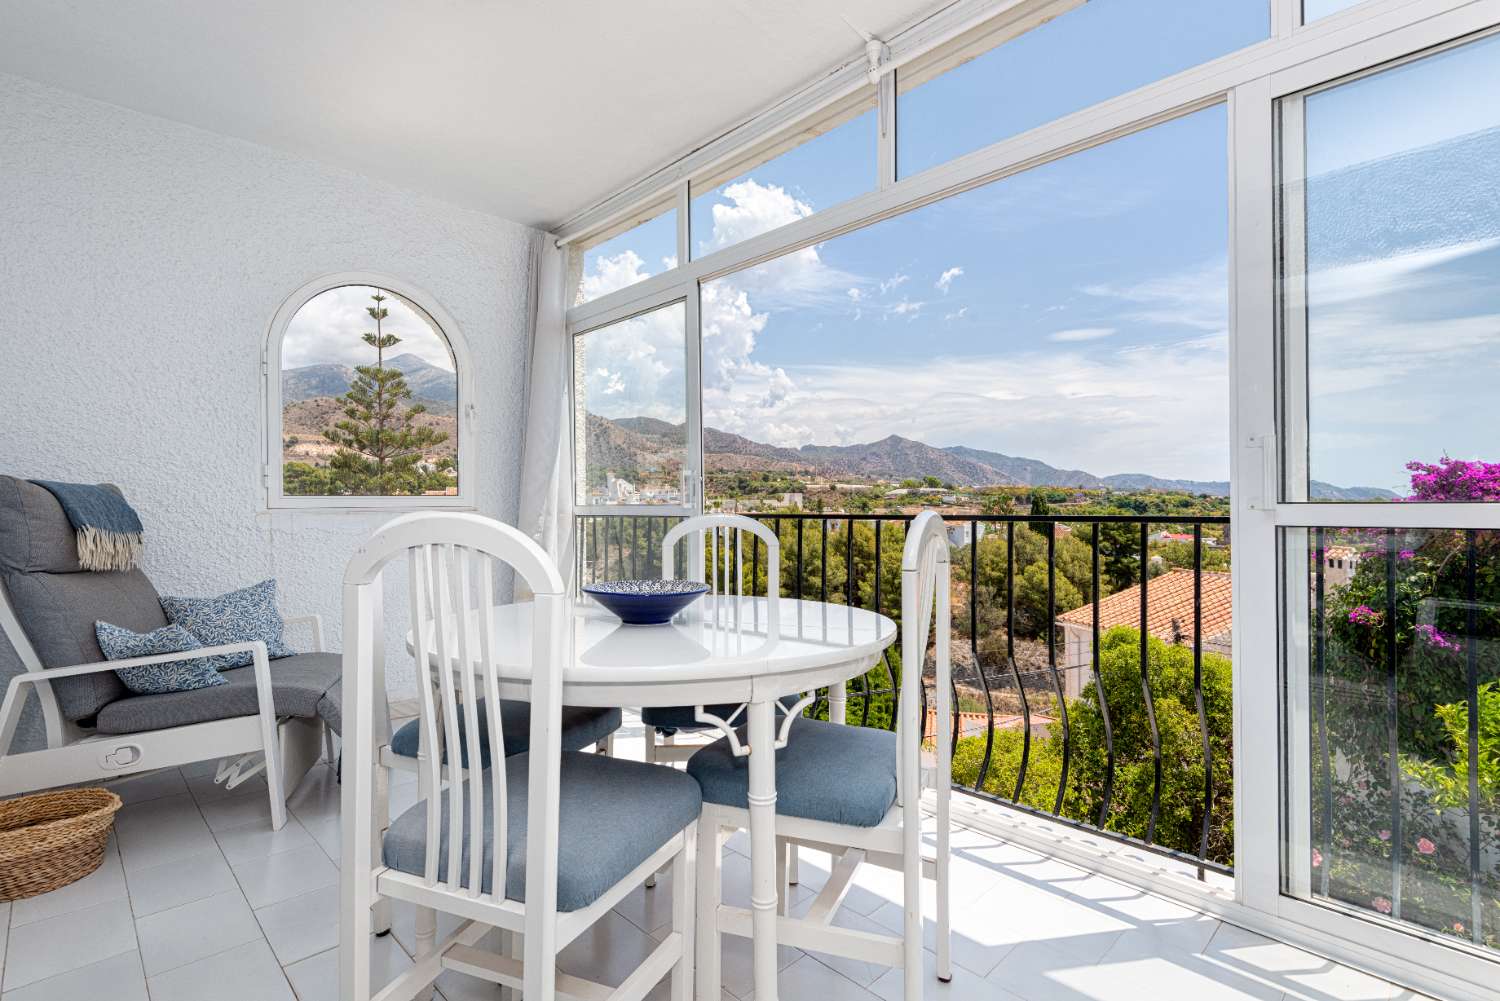 Detached villa for sale in Nerja with fantastic sea and mountain views